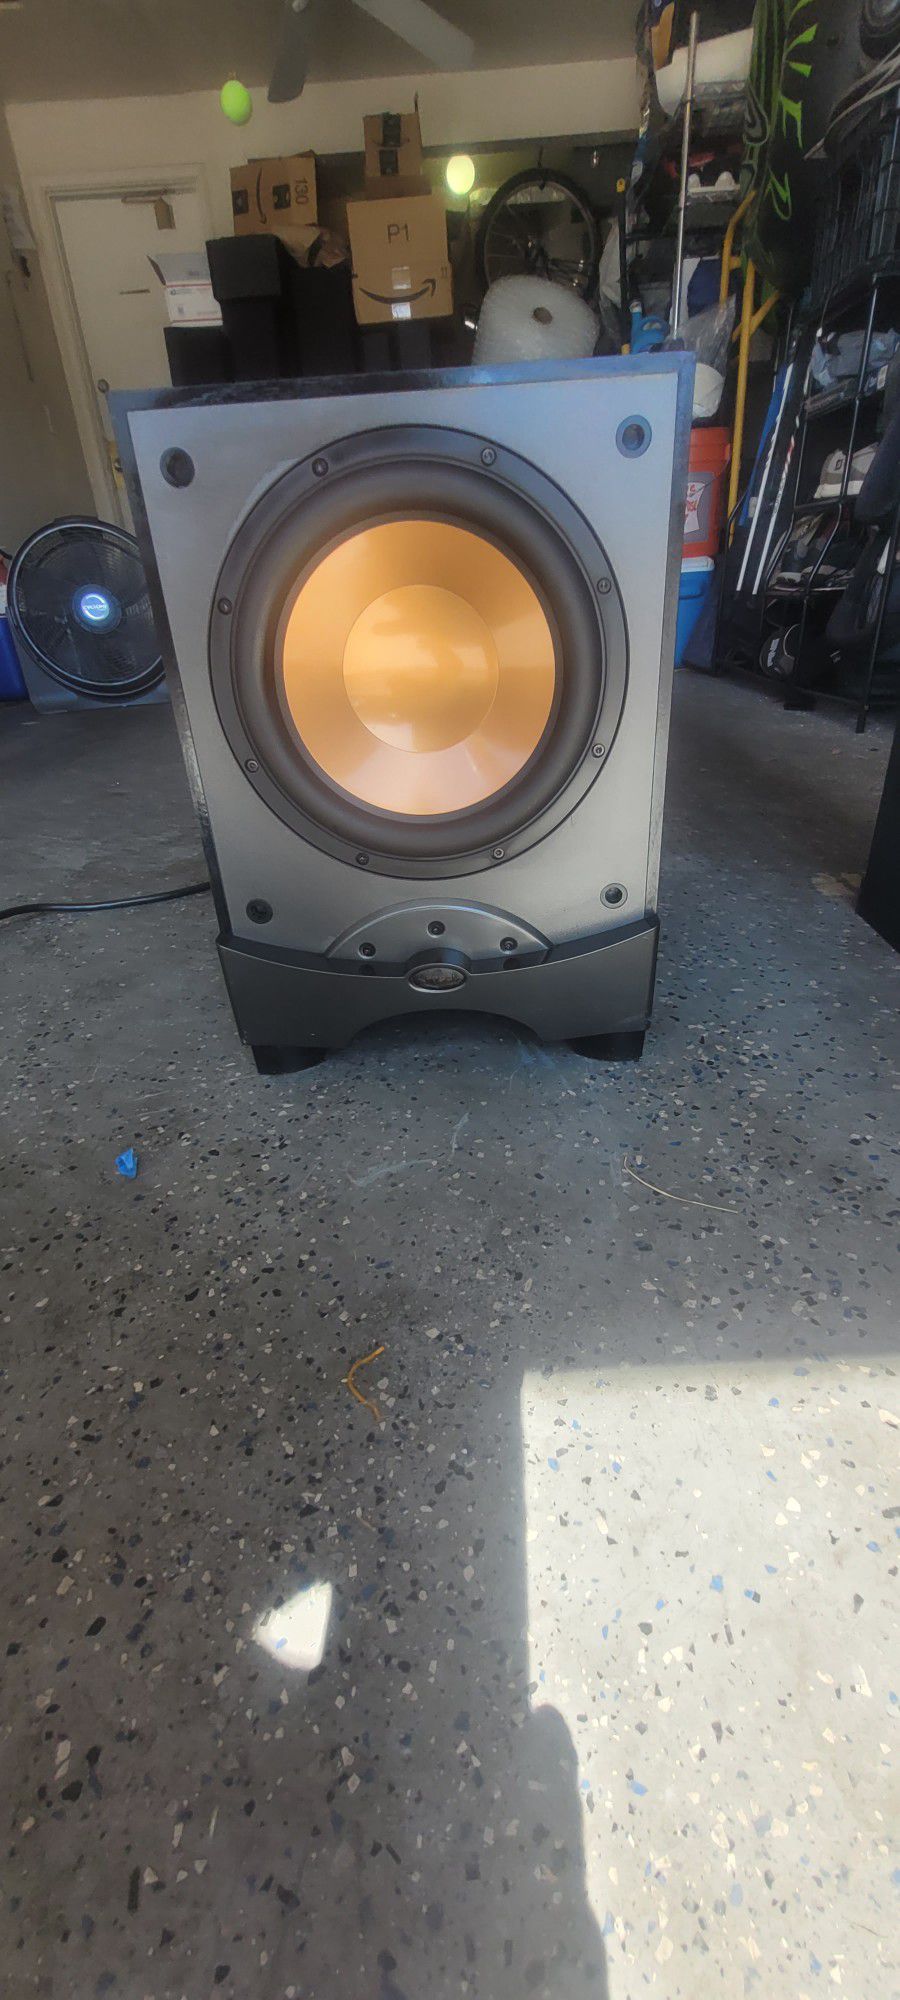 Klipsch RW-10 Subwoofer Works Perfectly Good Condition